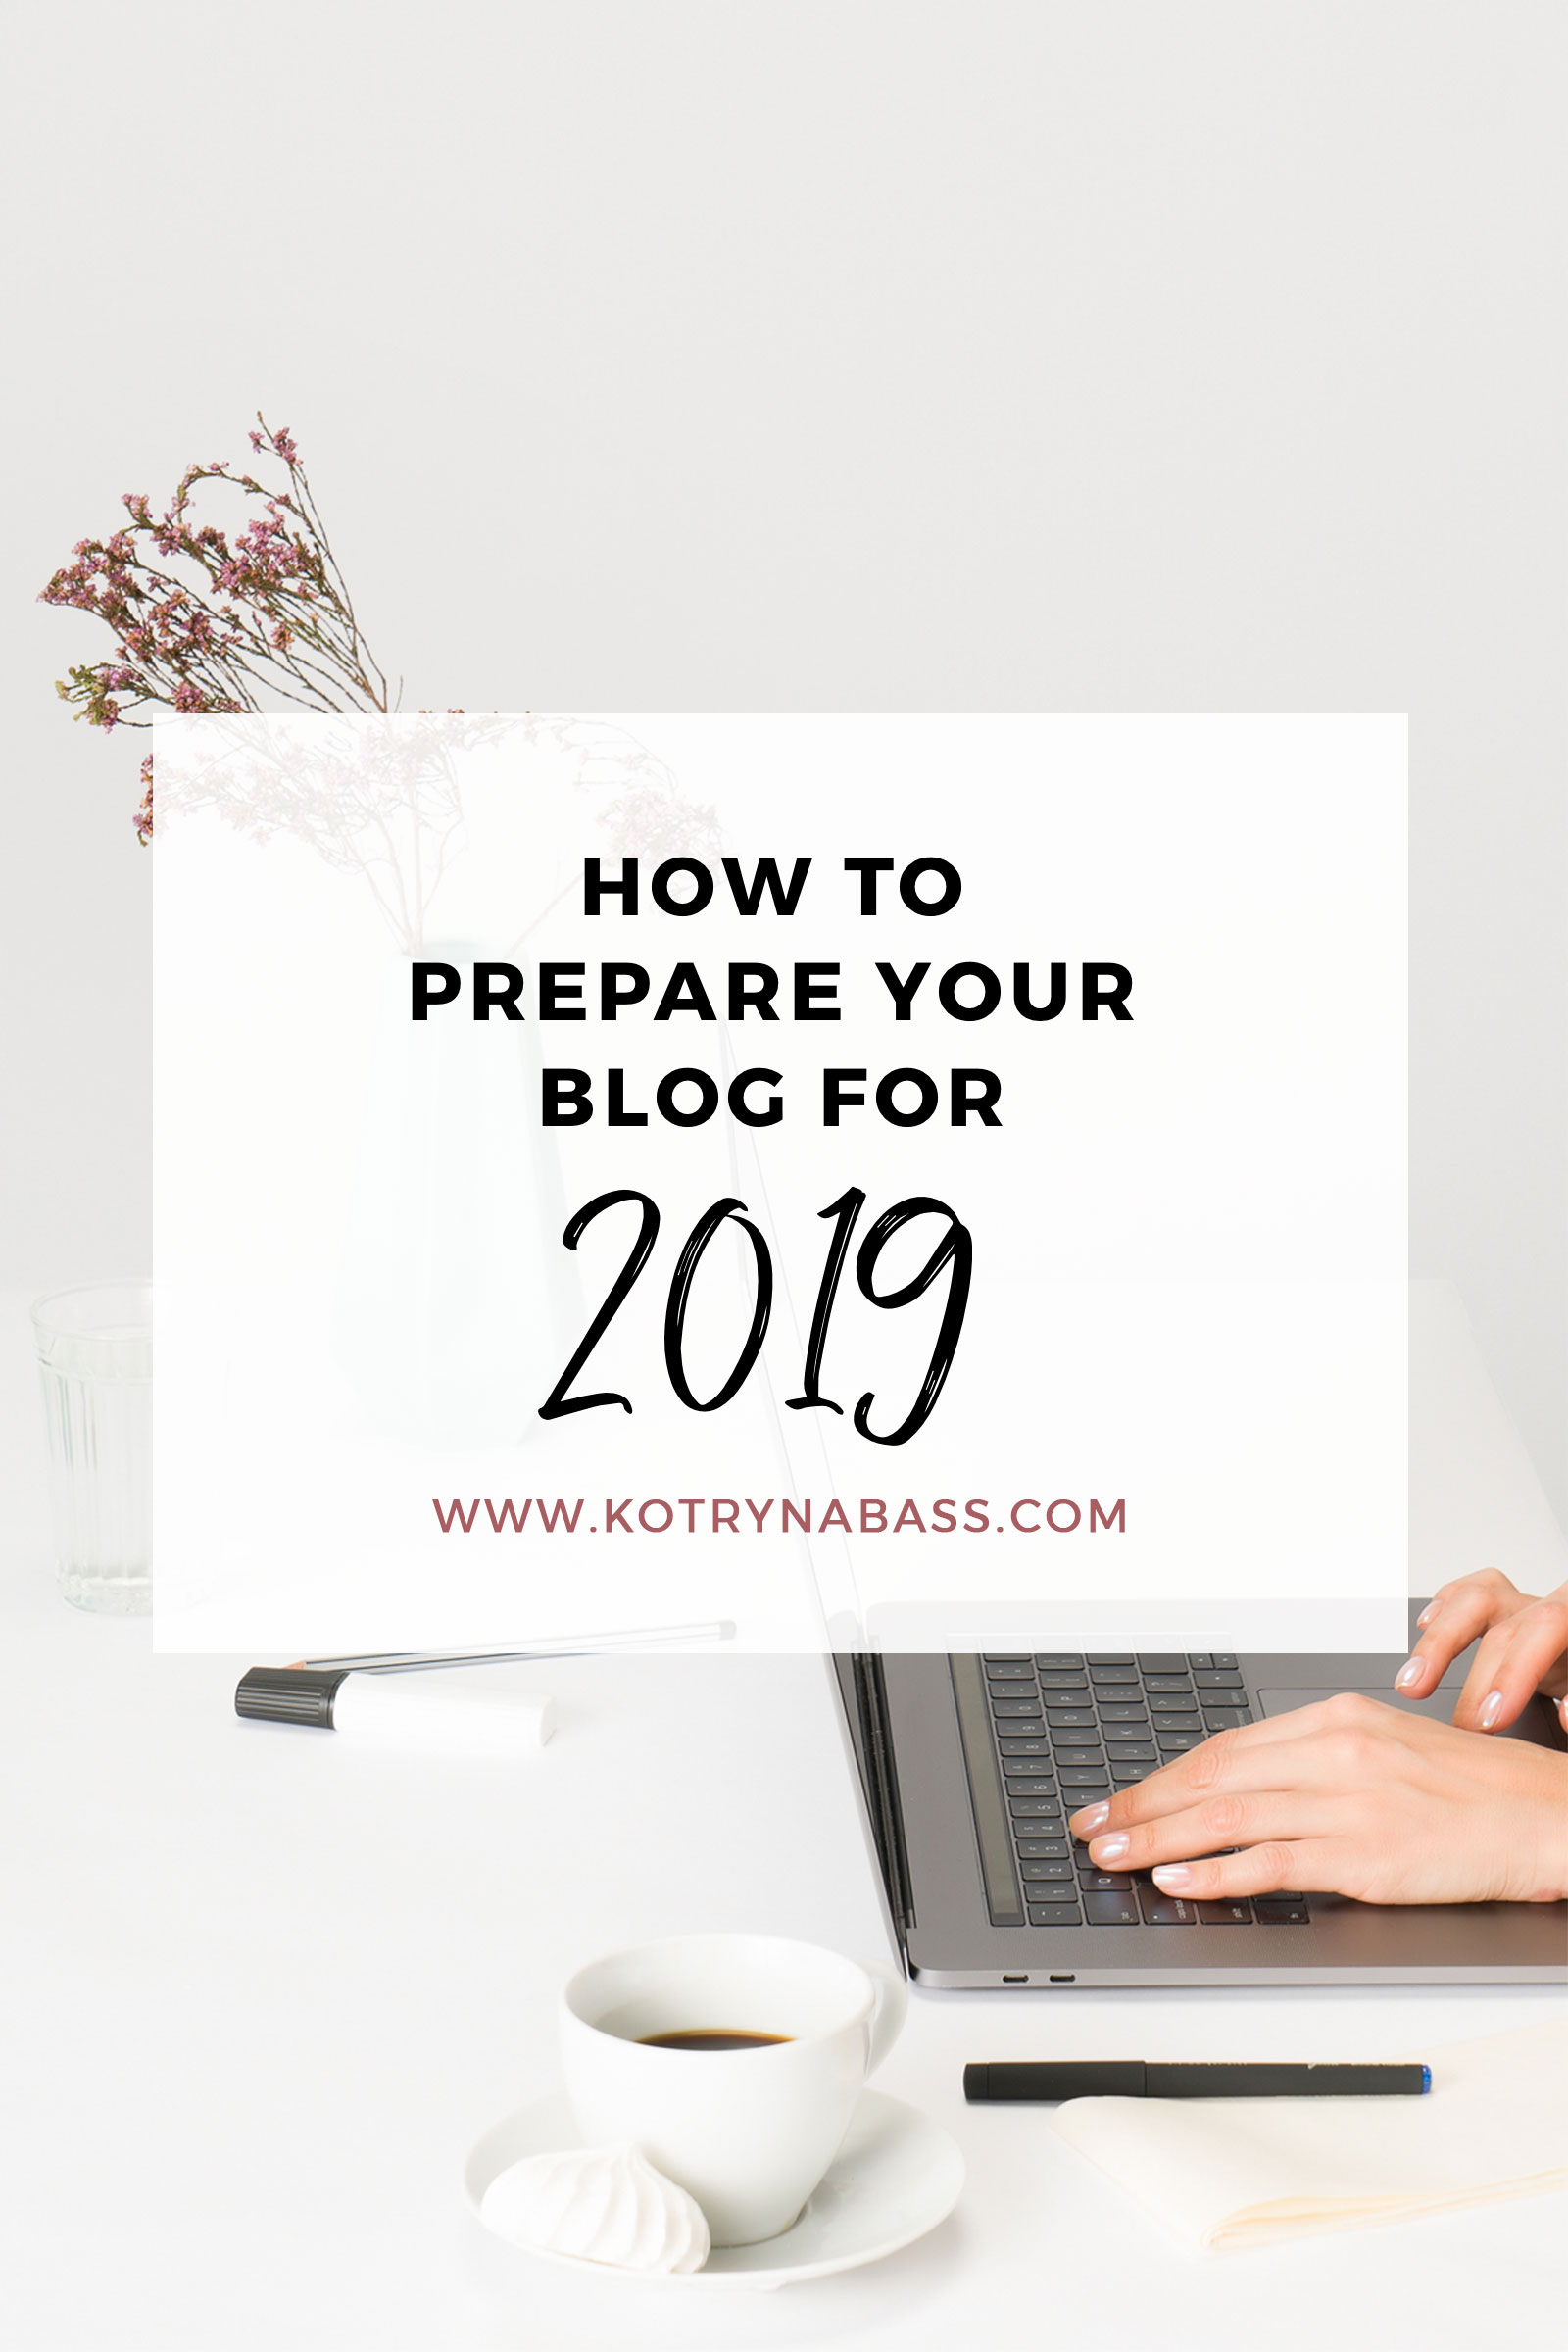 January is often one of the busiest months in the blogosphere, so you have to make sure you're ready. Here are some ways for you to prepare your blog for 2019.